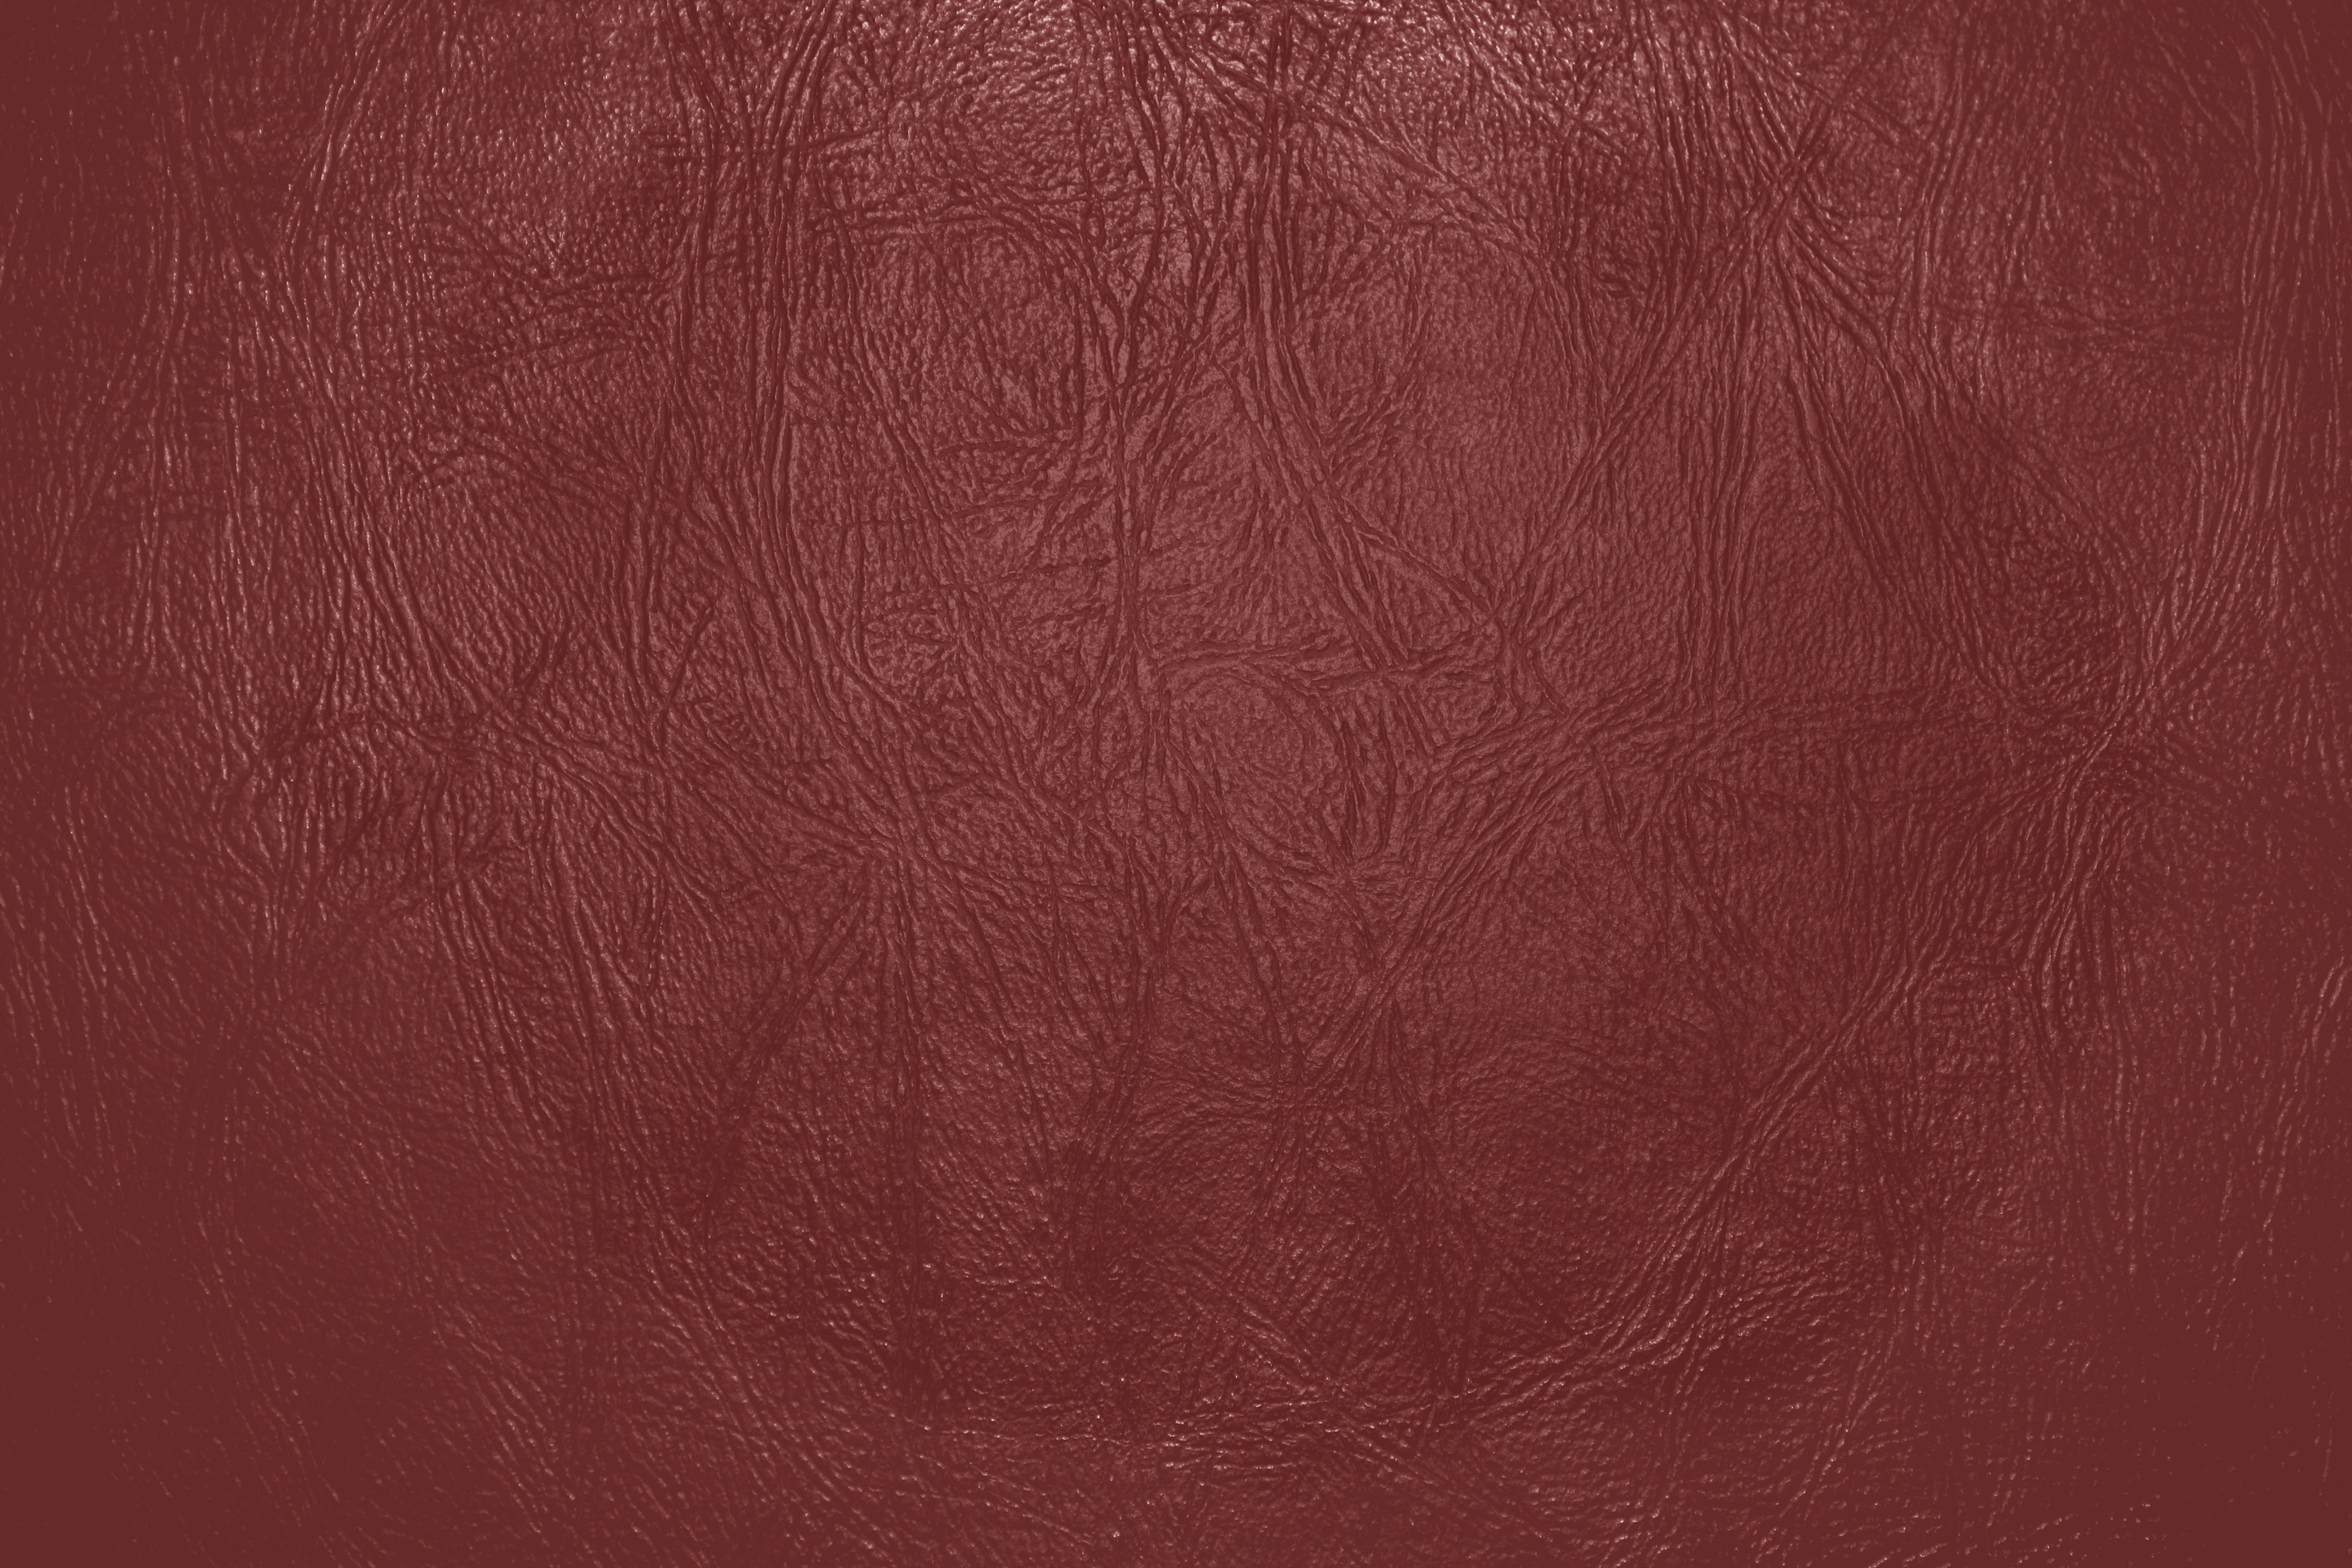 Maroon Leather Close Up Texture Picture Photograph Photos